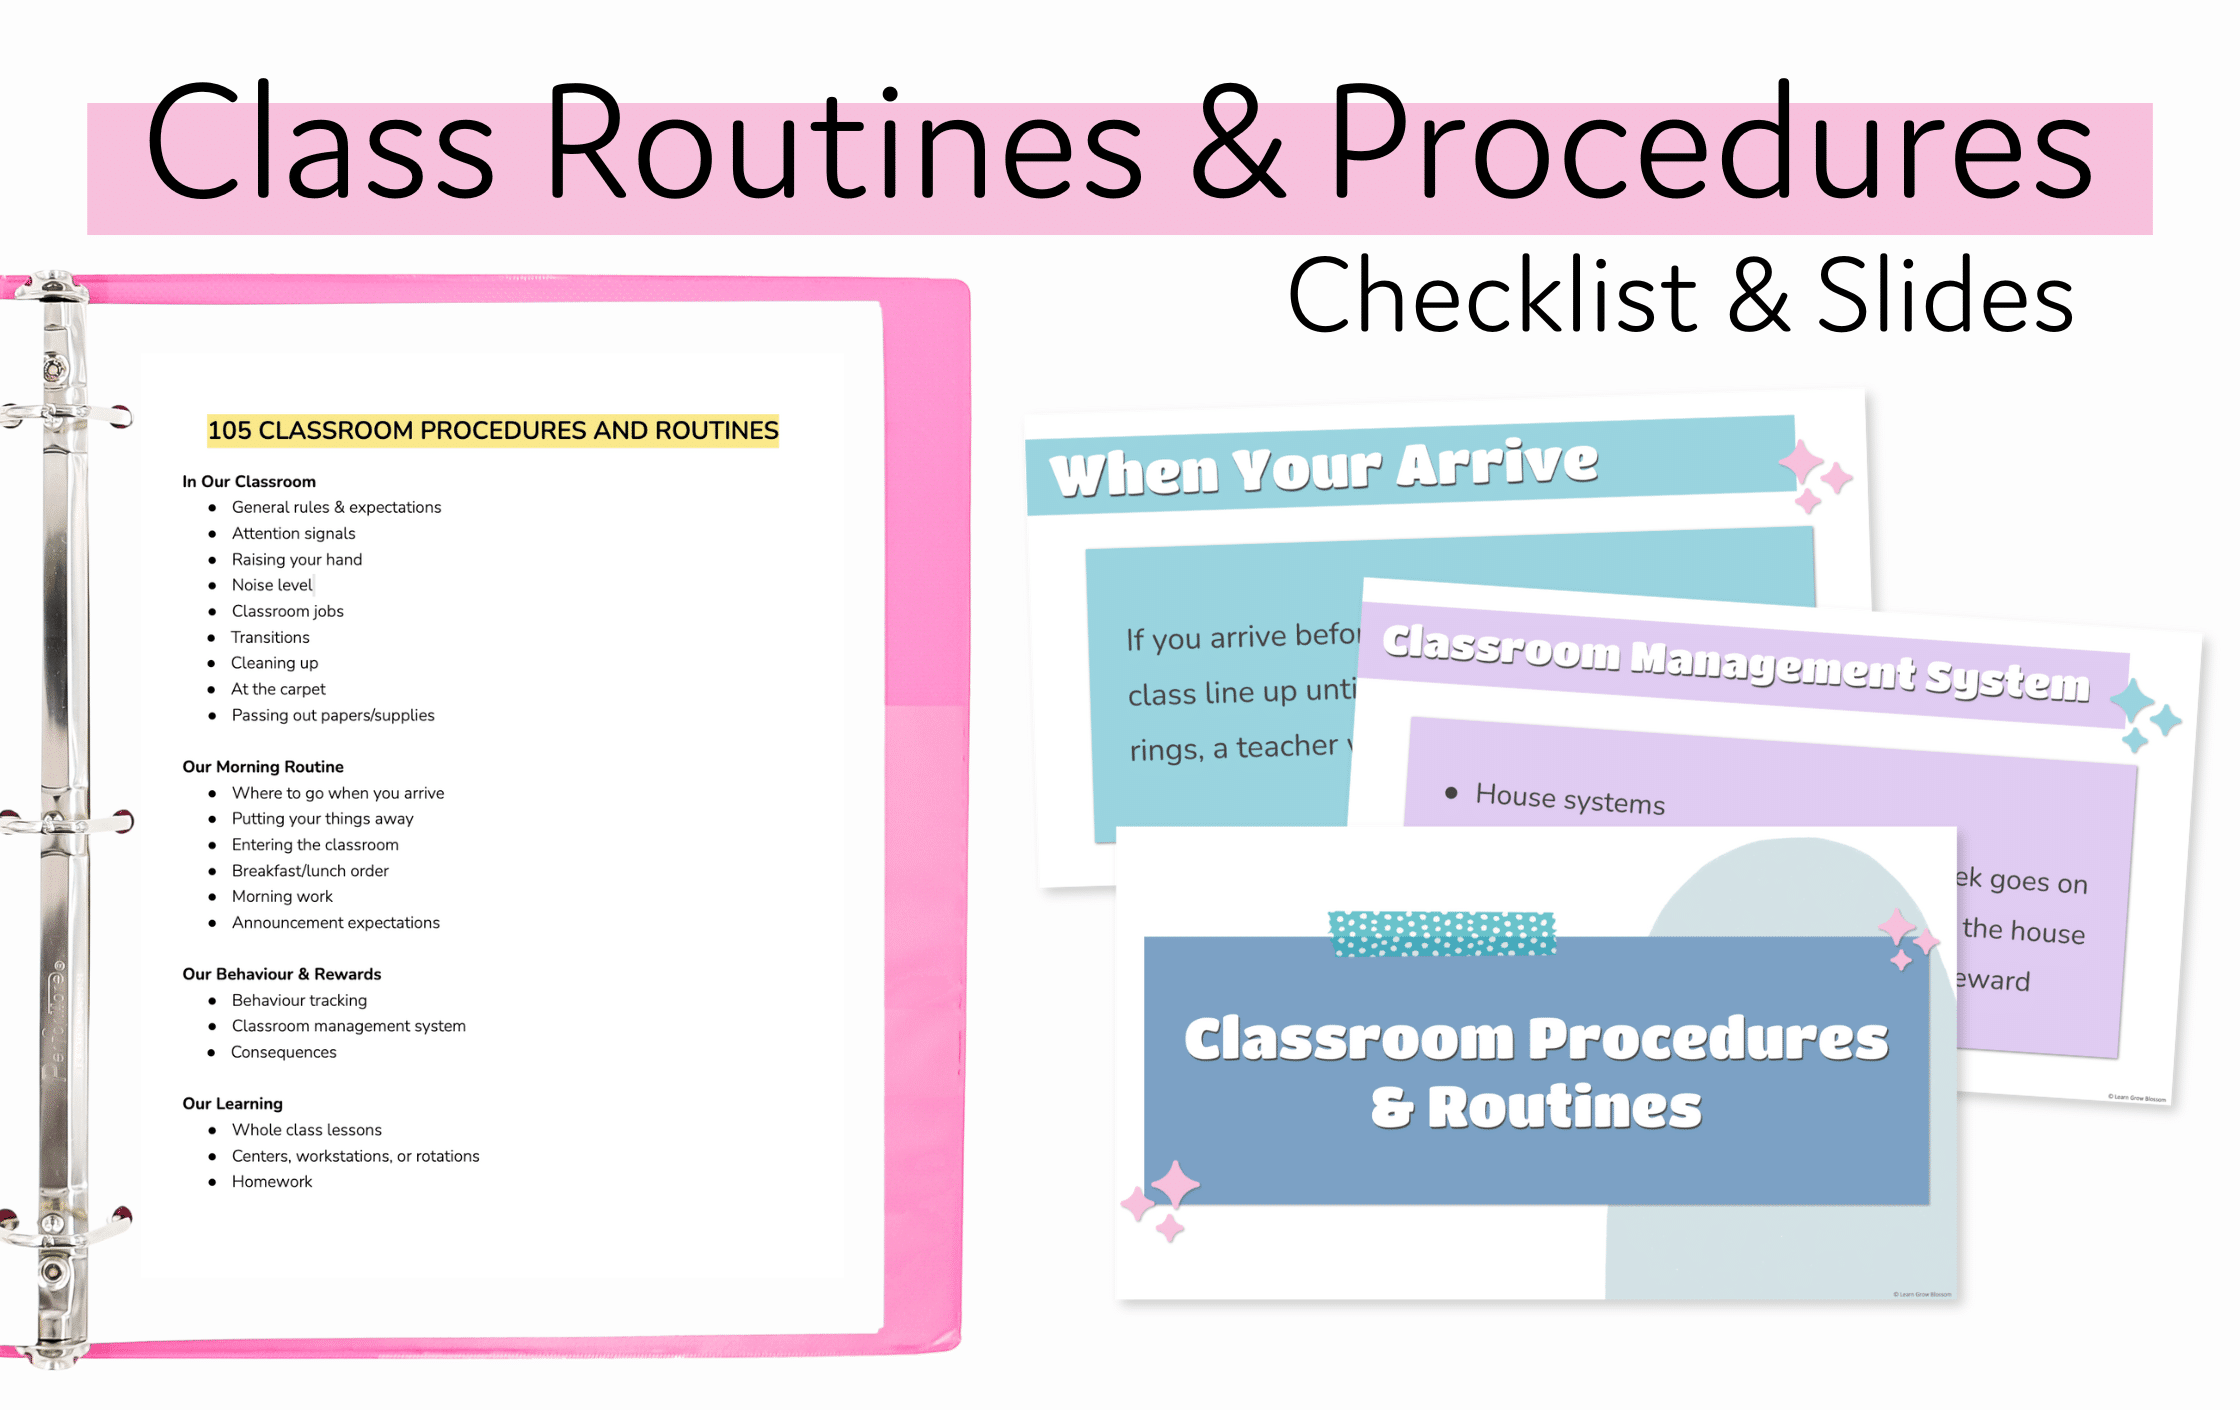 Create Class Routines & procedures slides as part of your back to school prep for teachers. Screenshot of classroom routines checklist and class routines and procedures slides